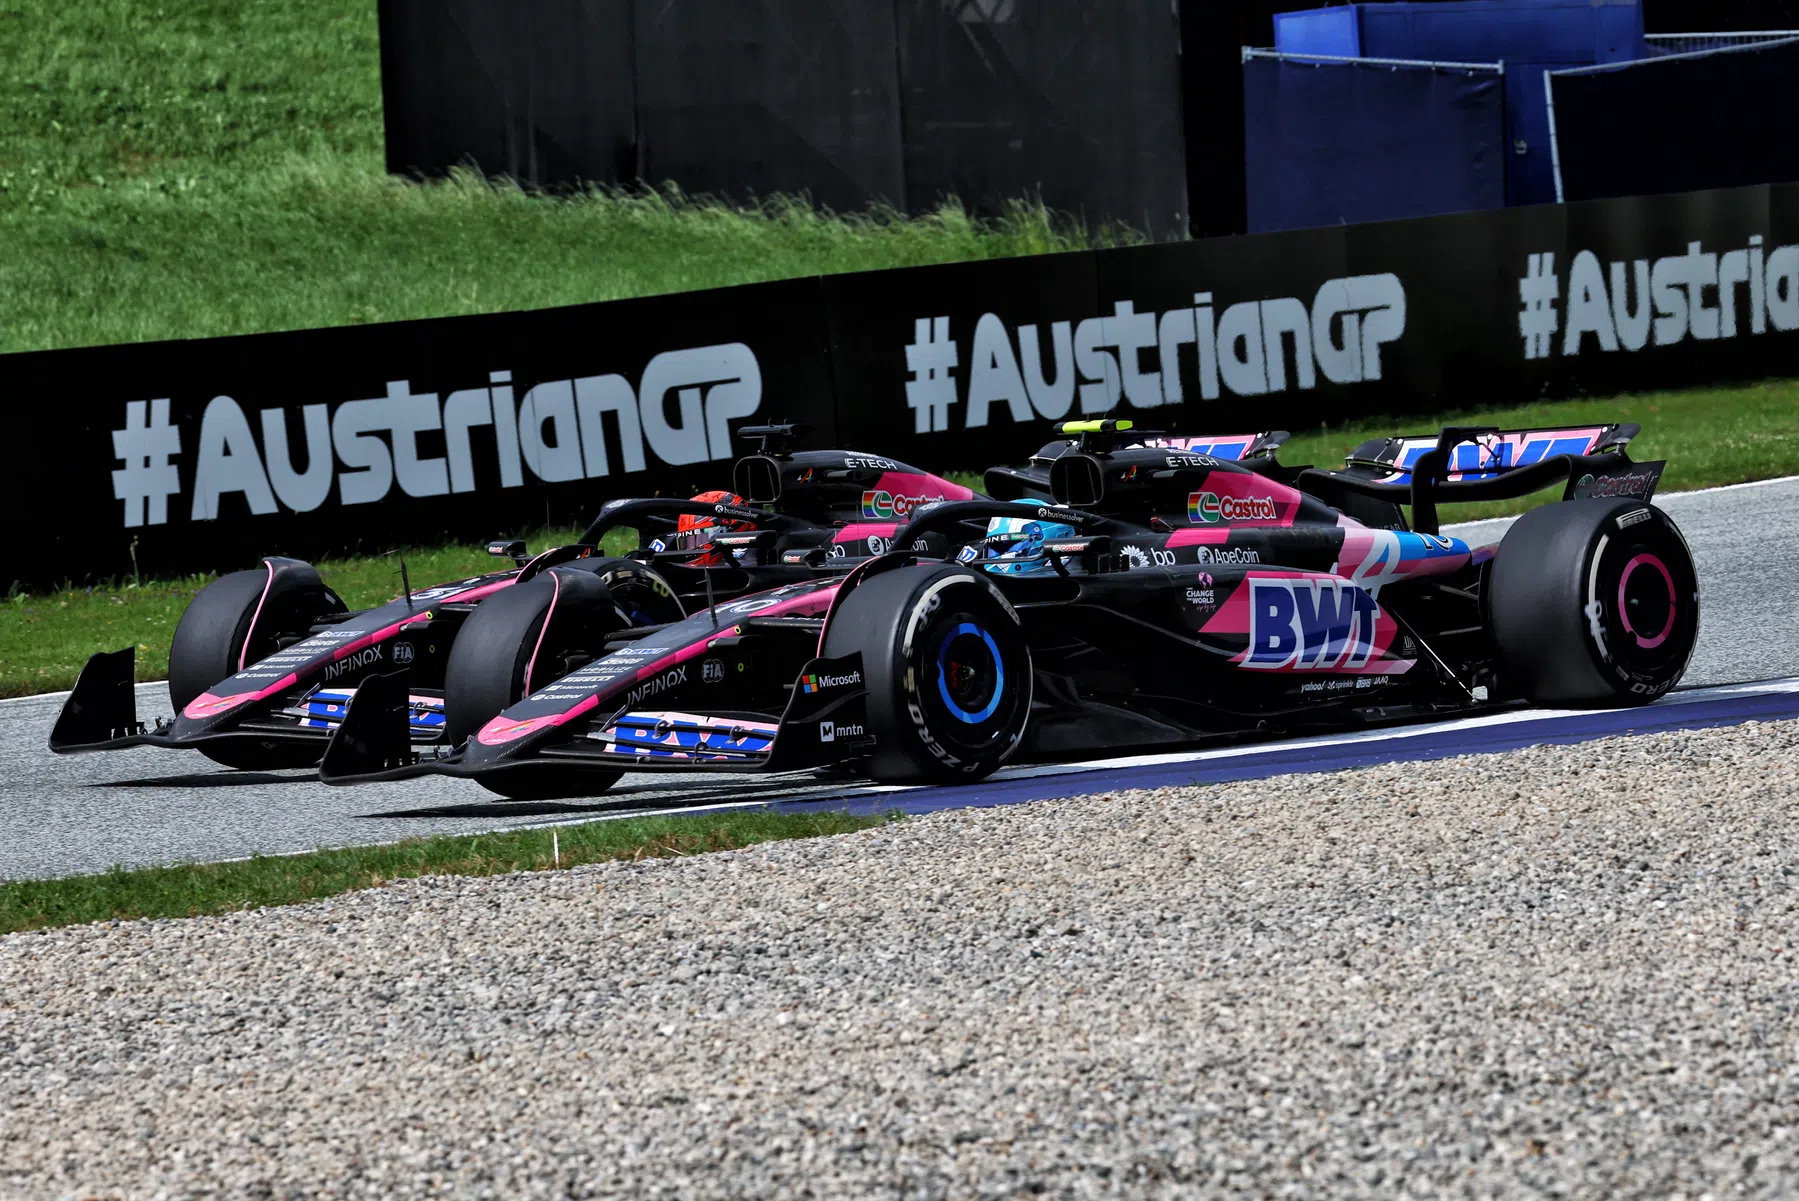 ocon and gasly battle on: waiting for trouble